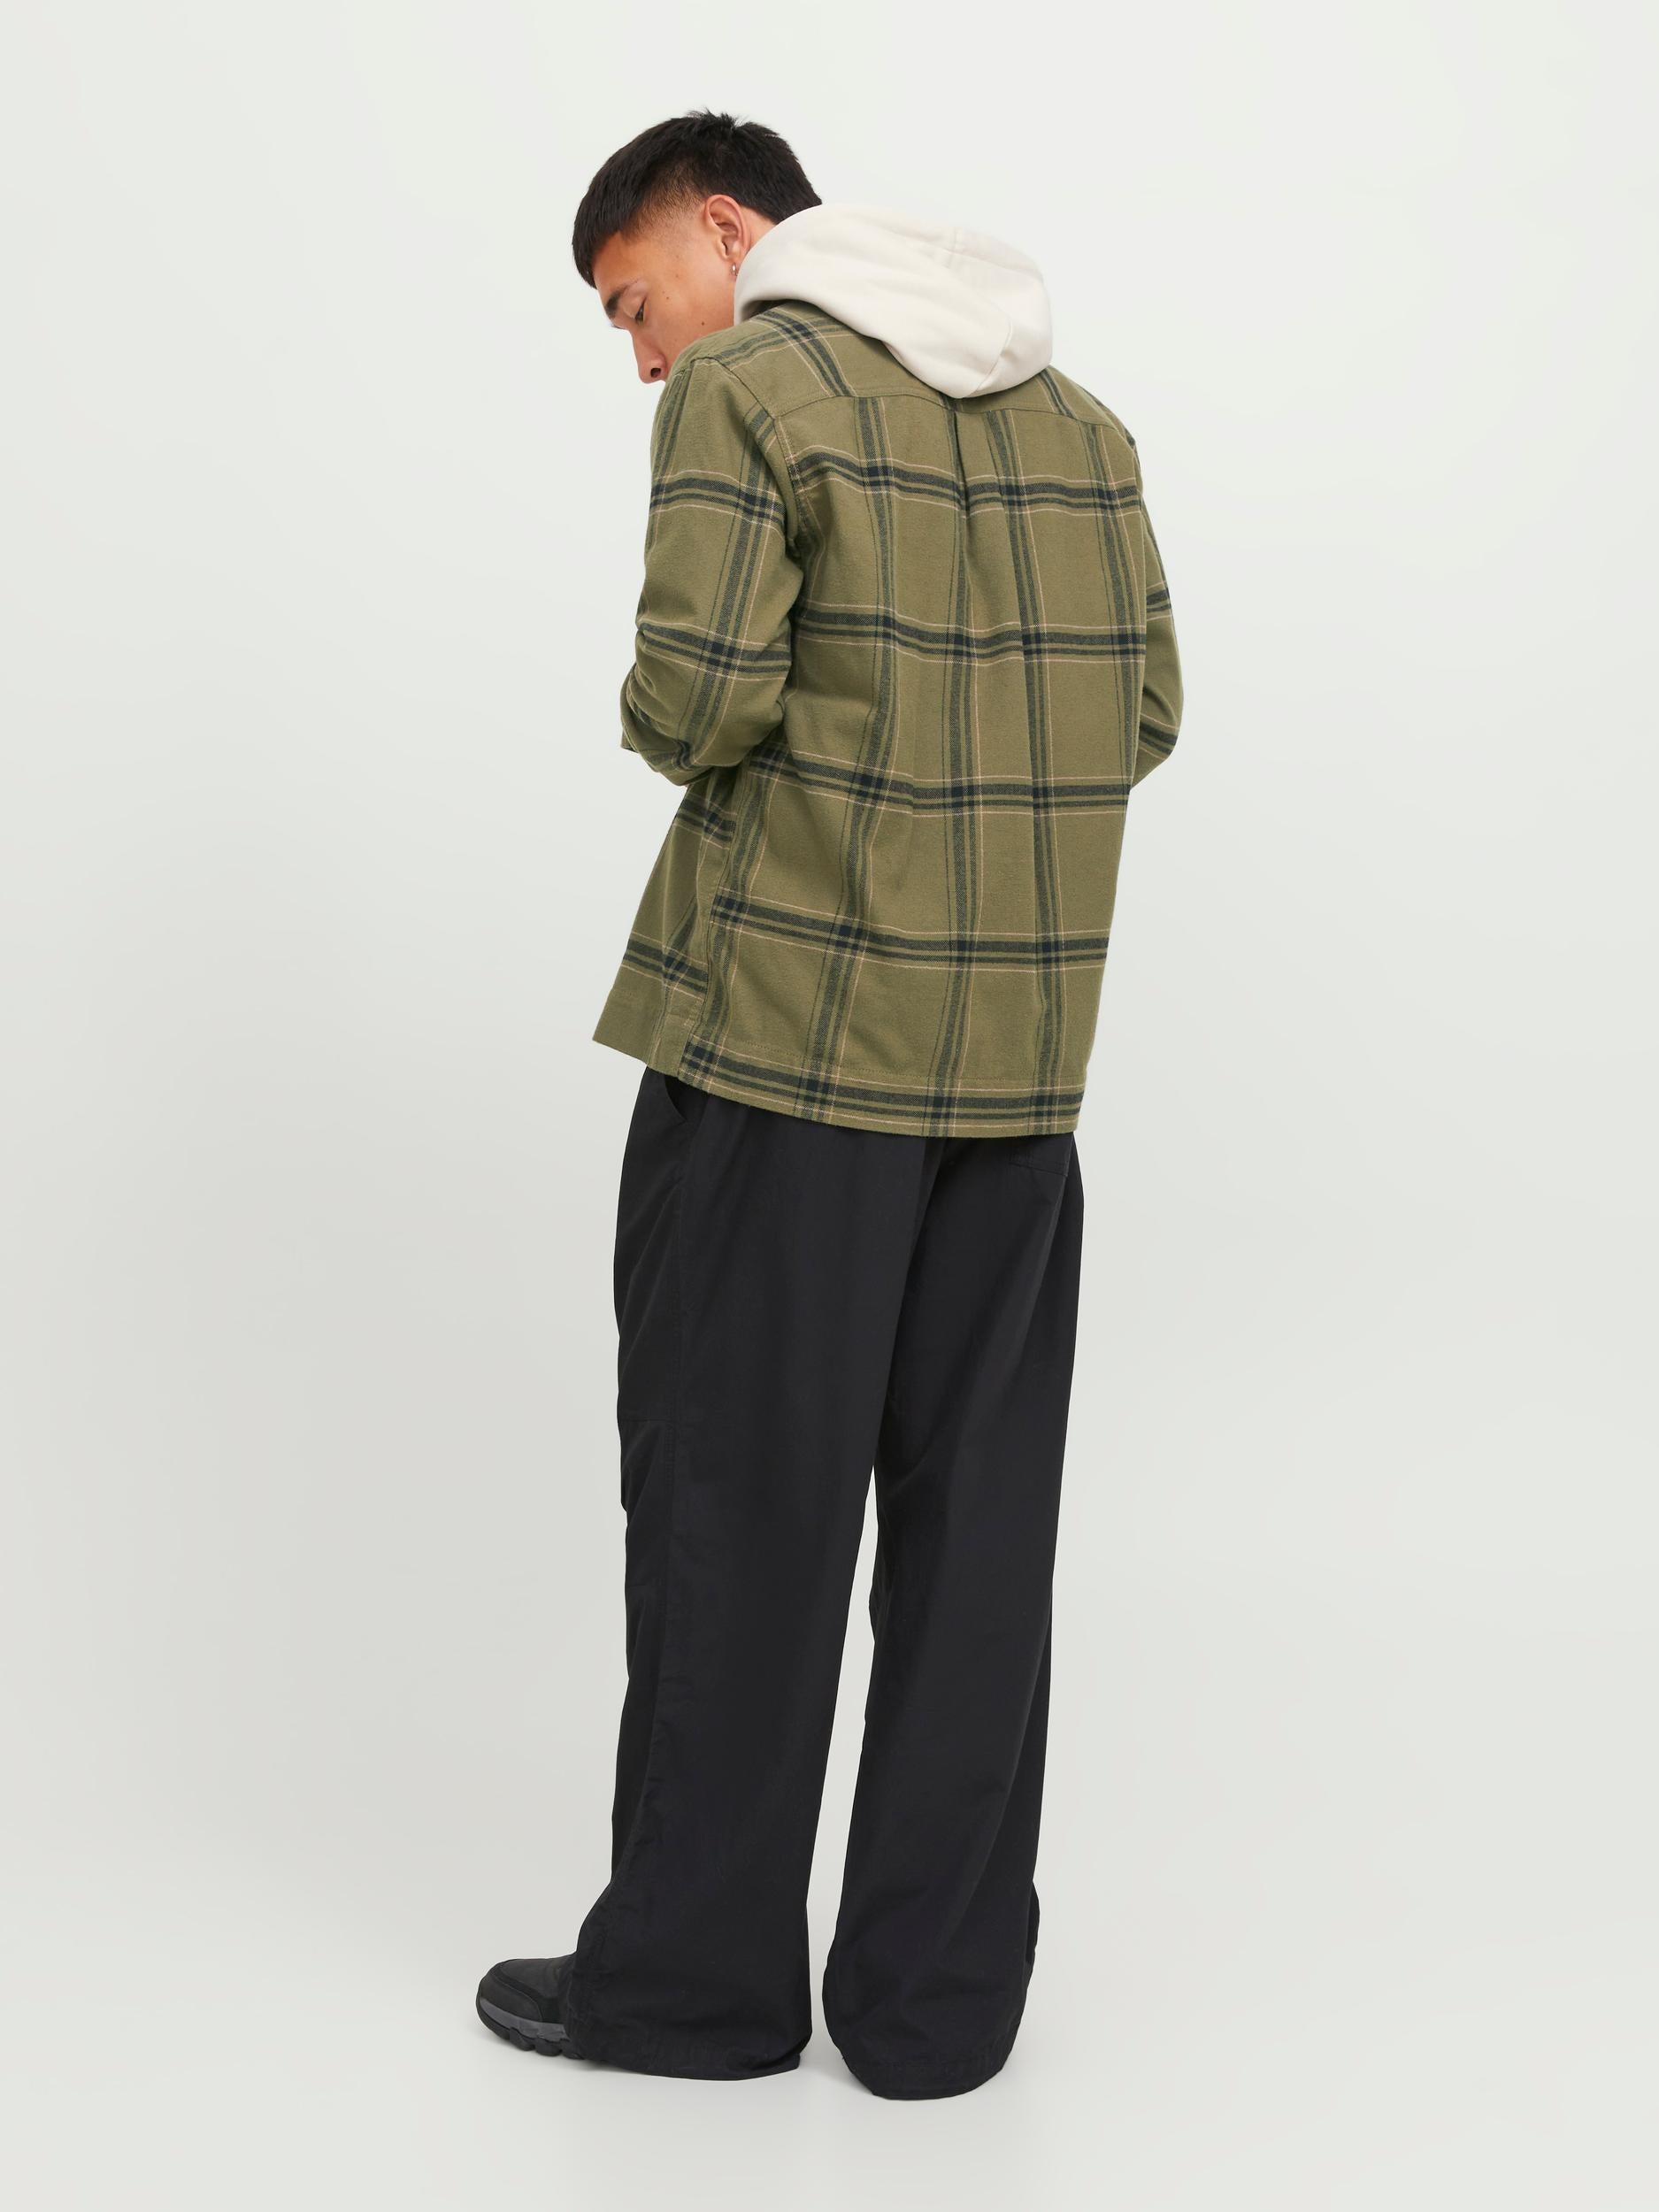 Space Logan Black Check Flannel Overshirt-Back view